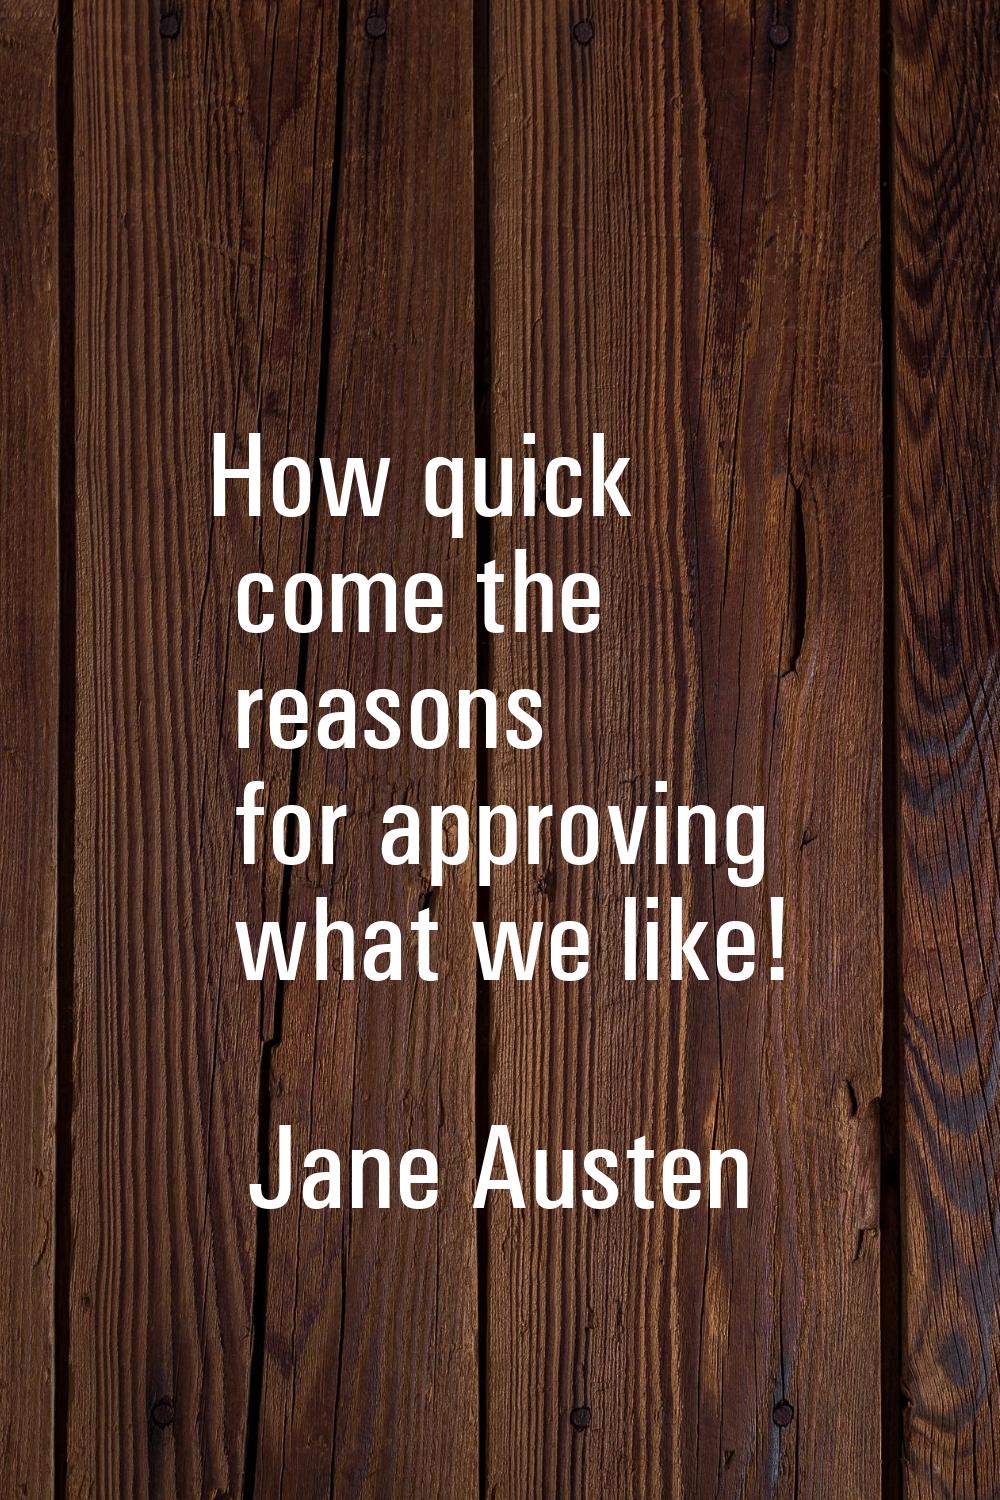 How quick come the reasons for approving what we like!